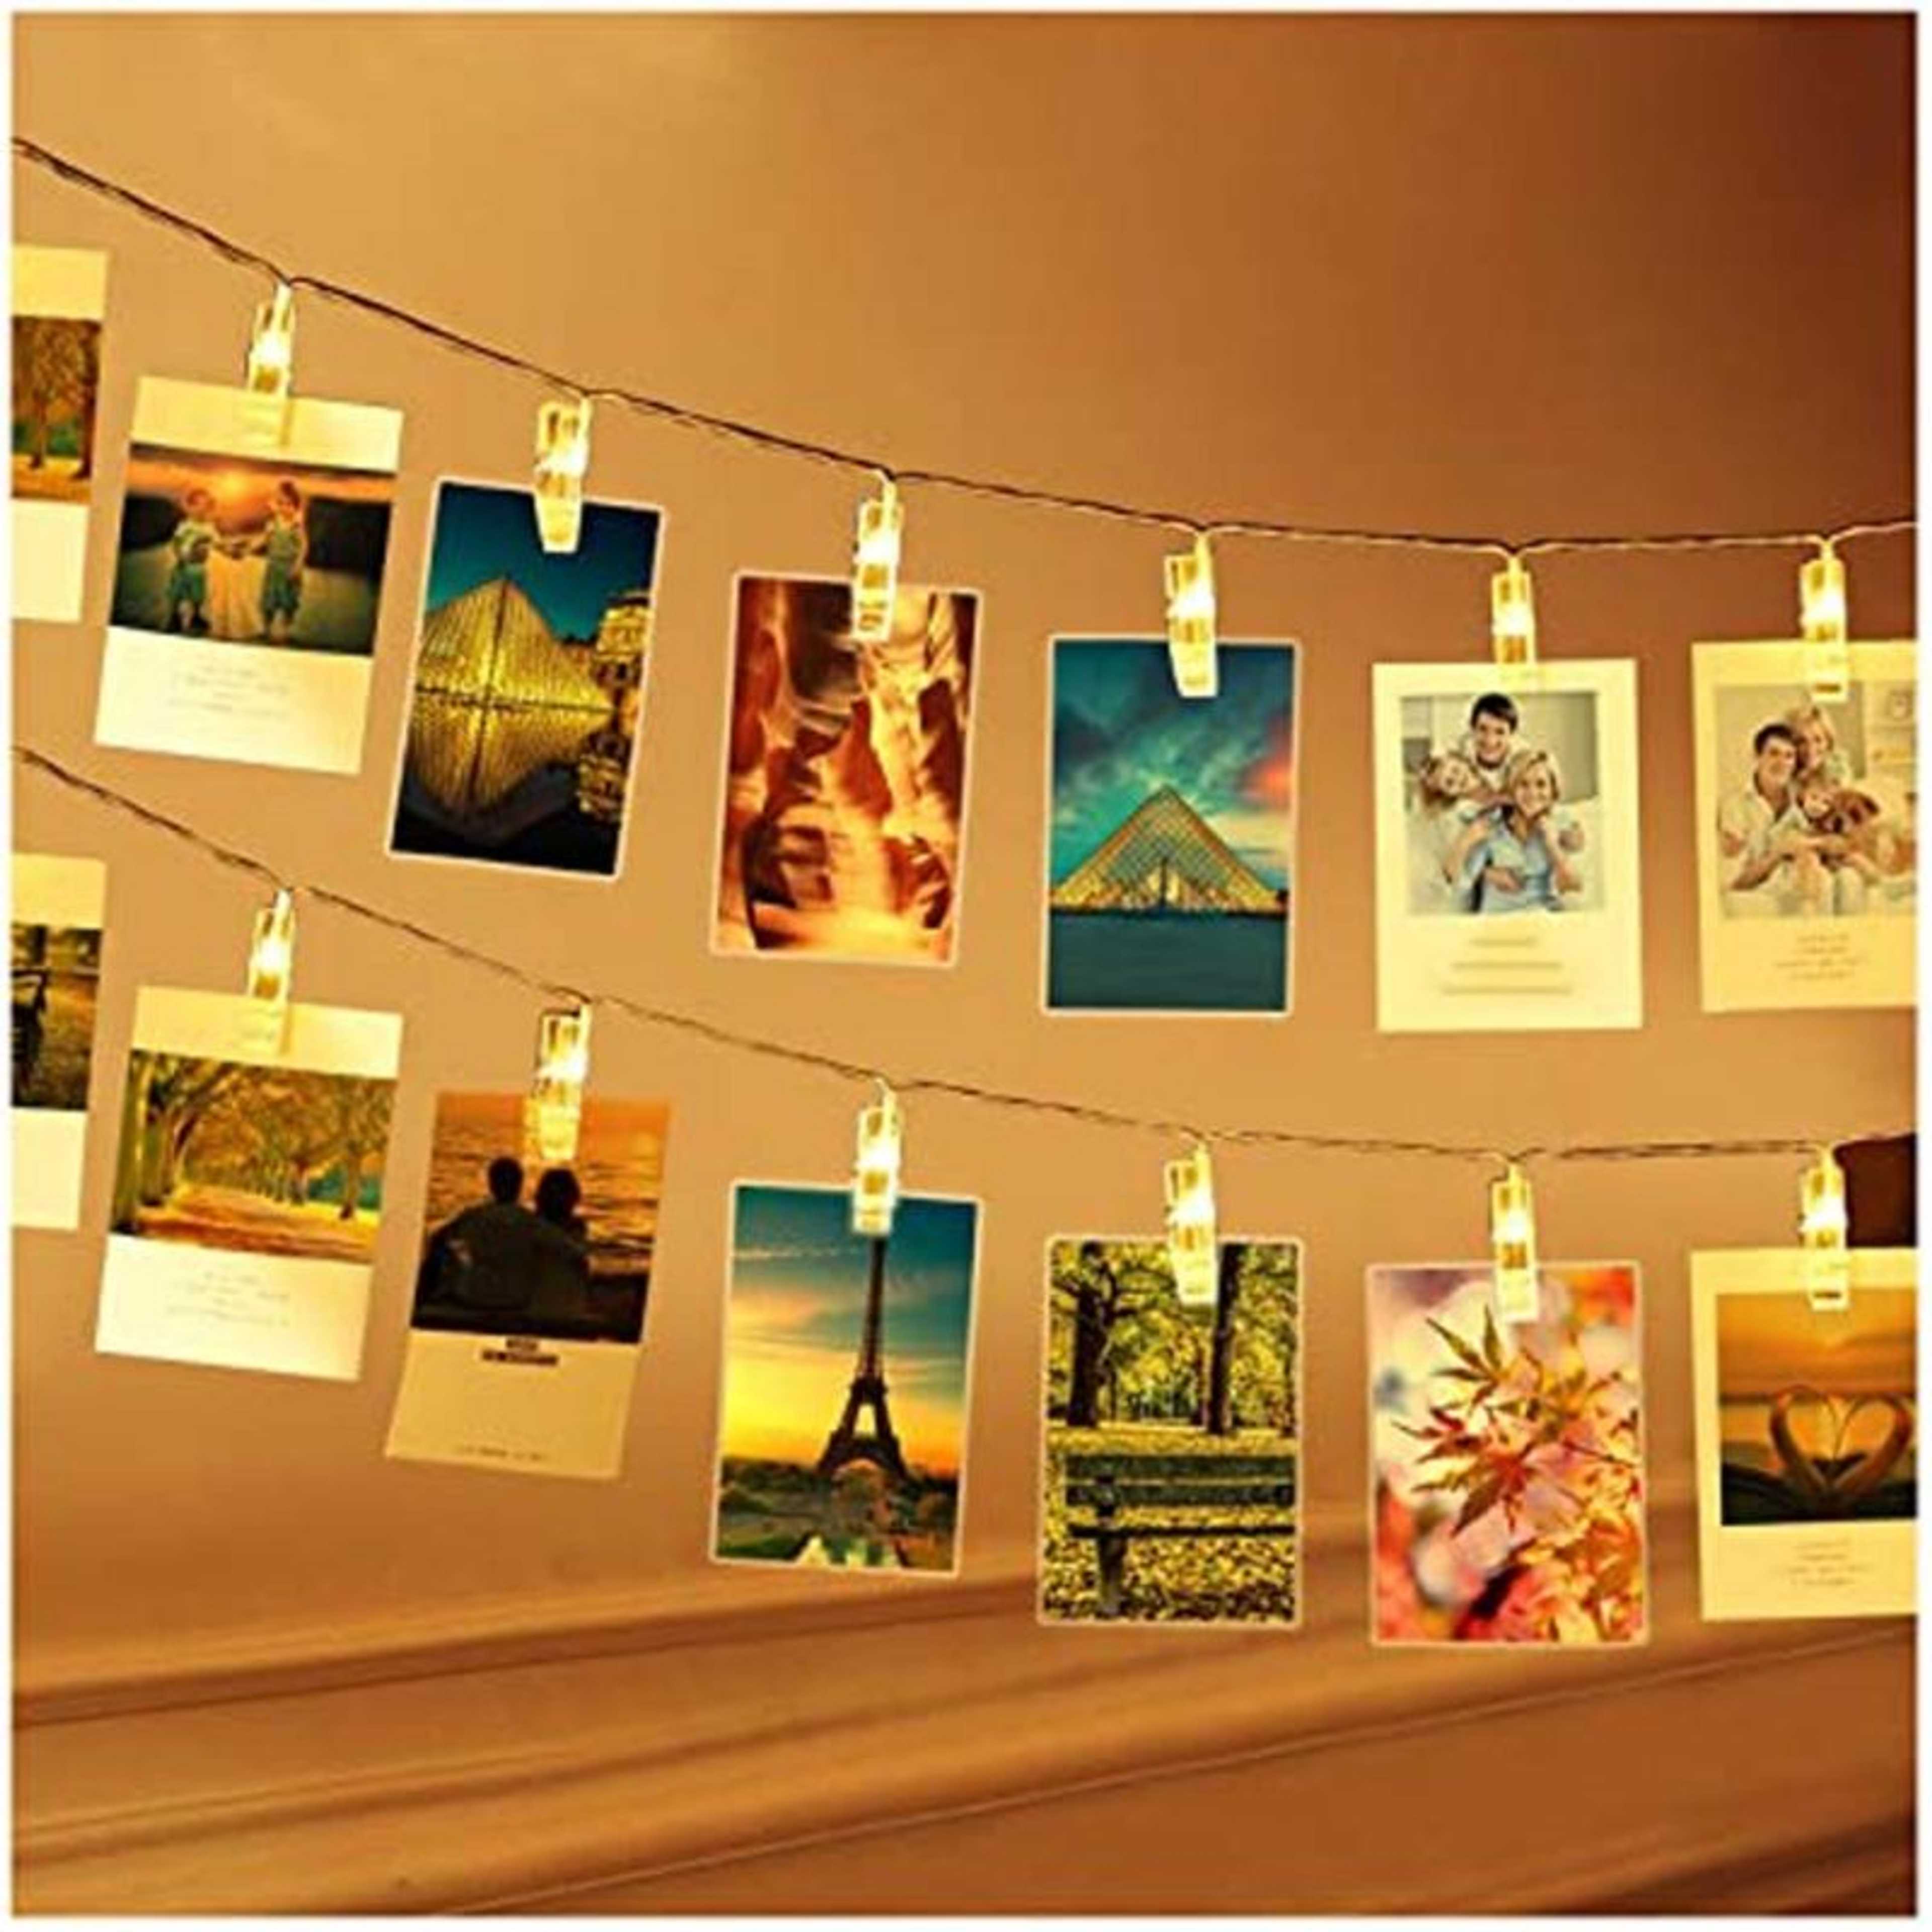 10 Ft 20 LEDs Photo Clips String Lights - Battery Powered Fairy Twinkle Light with Clips for Hanging Photos Pictures Cards & Artwork, for Bedroom Home Decoration (Warm White)